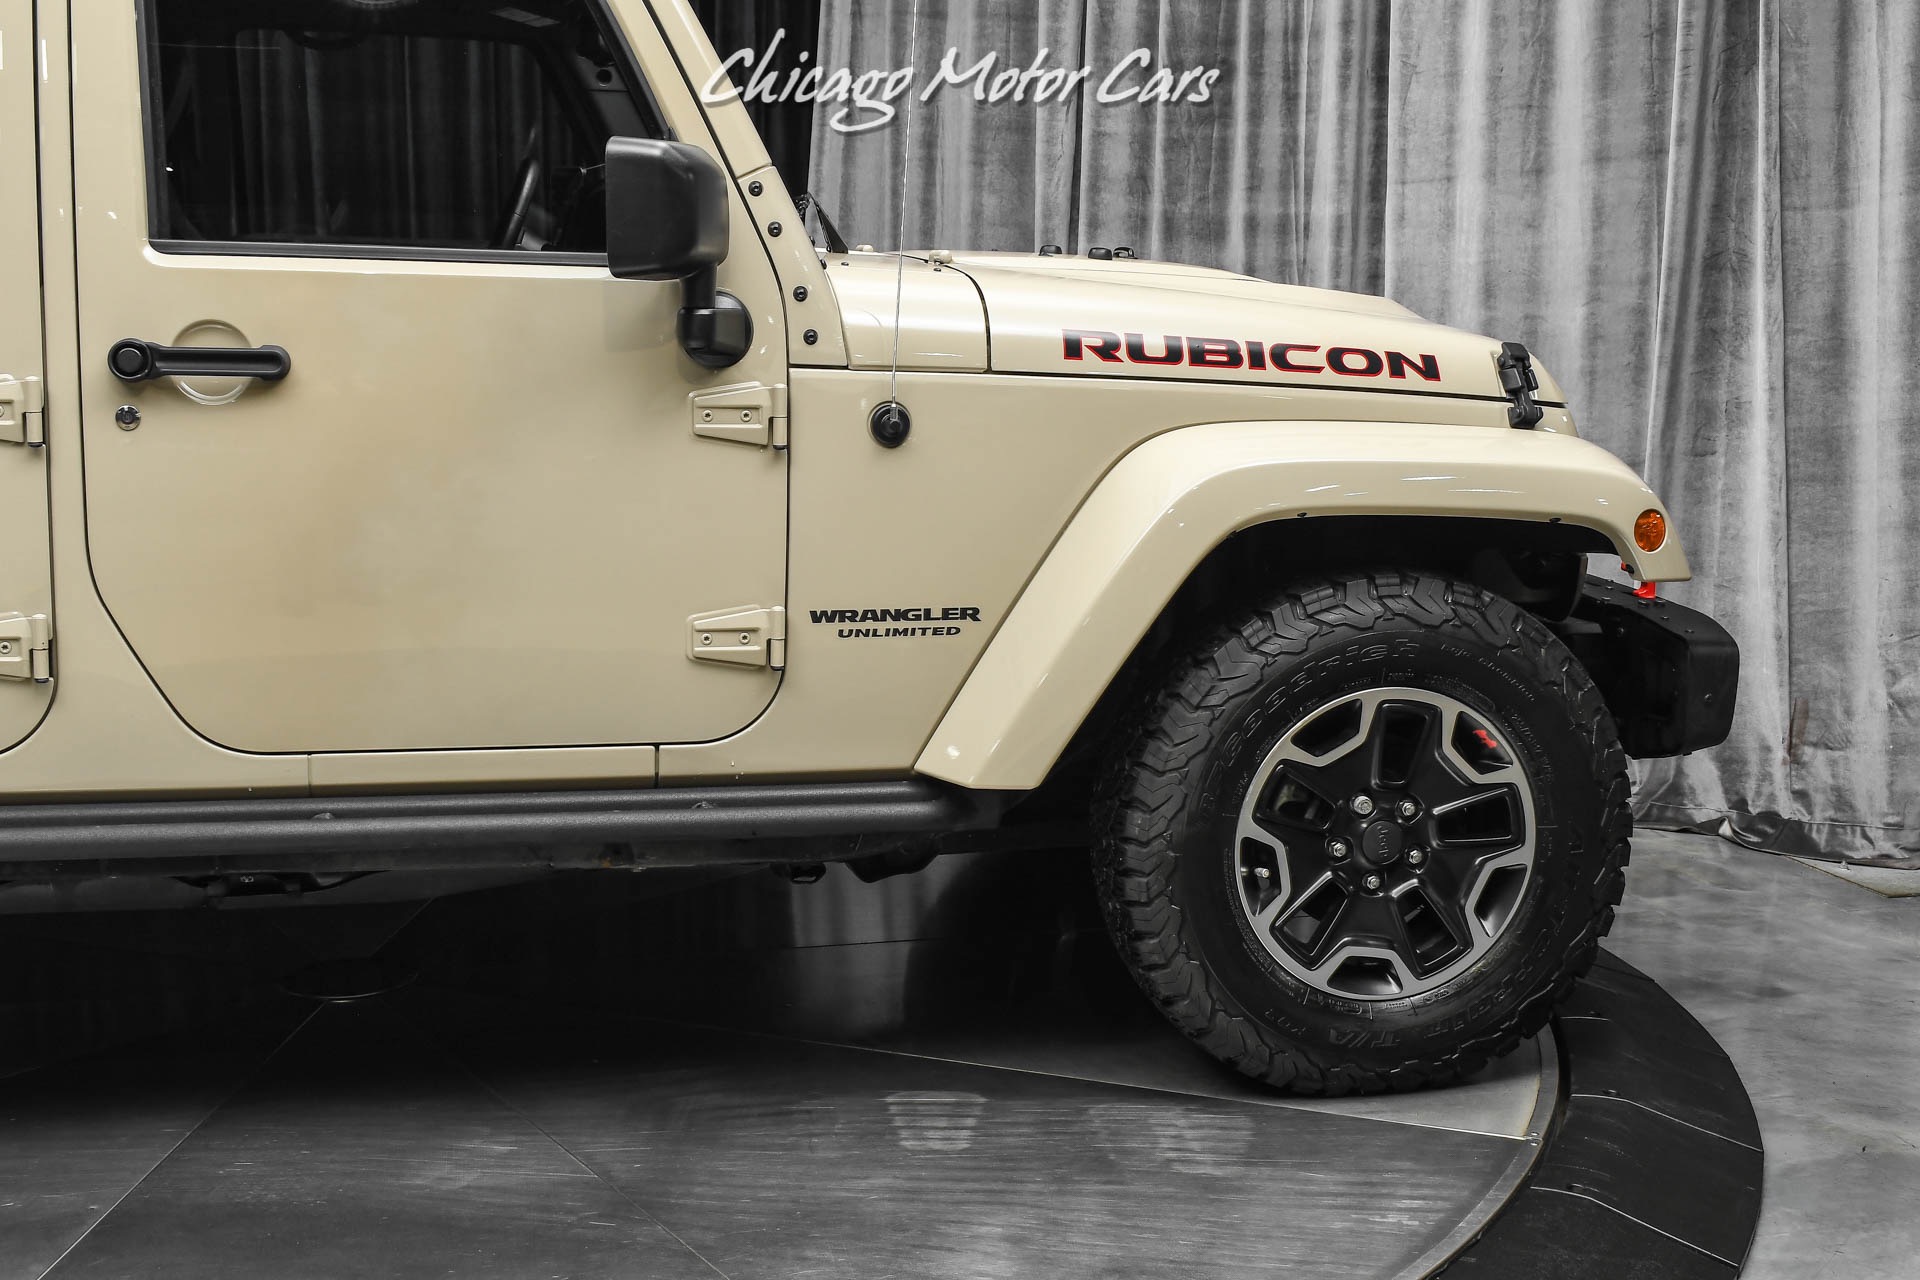 Used 2016 Jeep Wrangler Unlimited Rubicon Hard Rock RARE Mojave Sand!  Serviced! $49k+ MSRP! For Sale (Special Pricing) | Chicago Motor Cars Stock  #19120